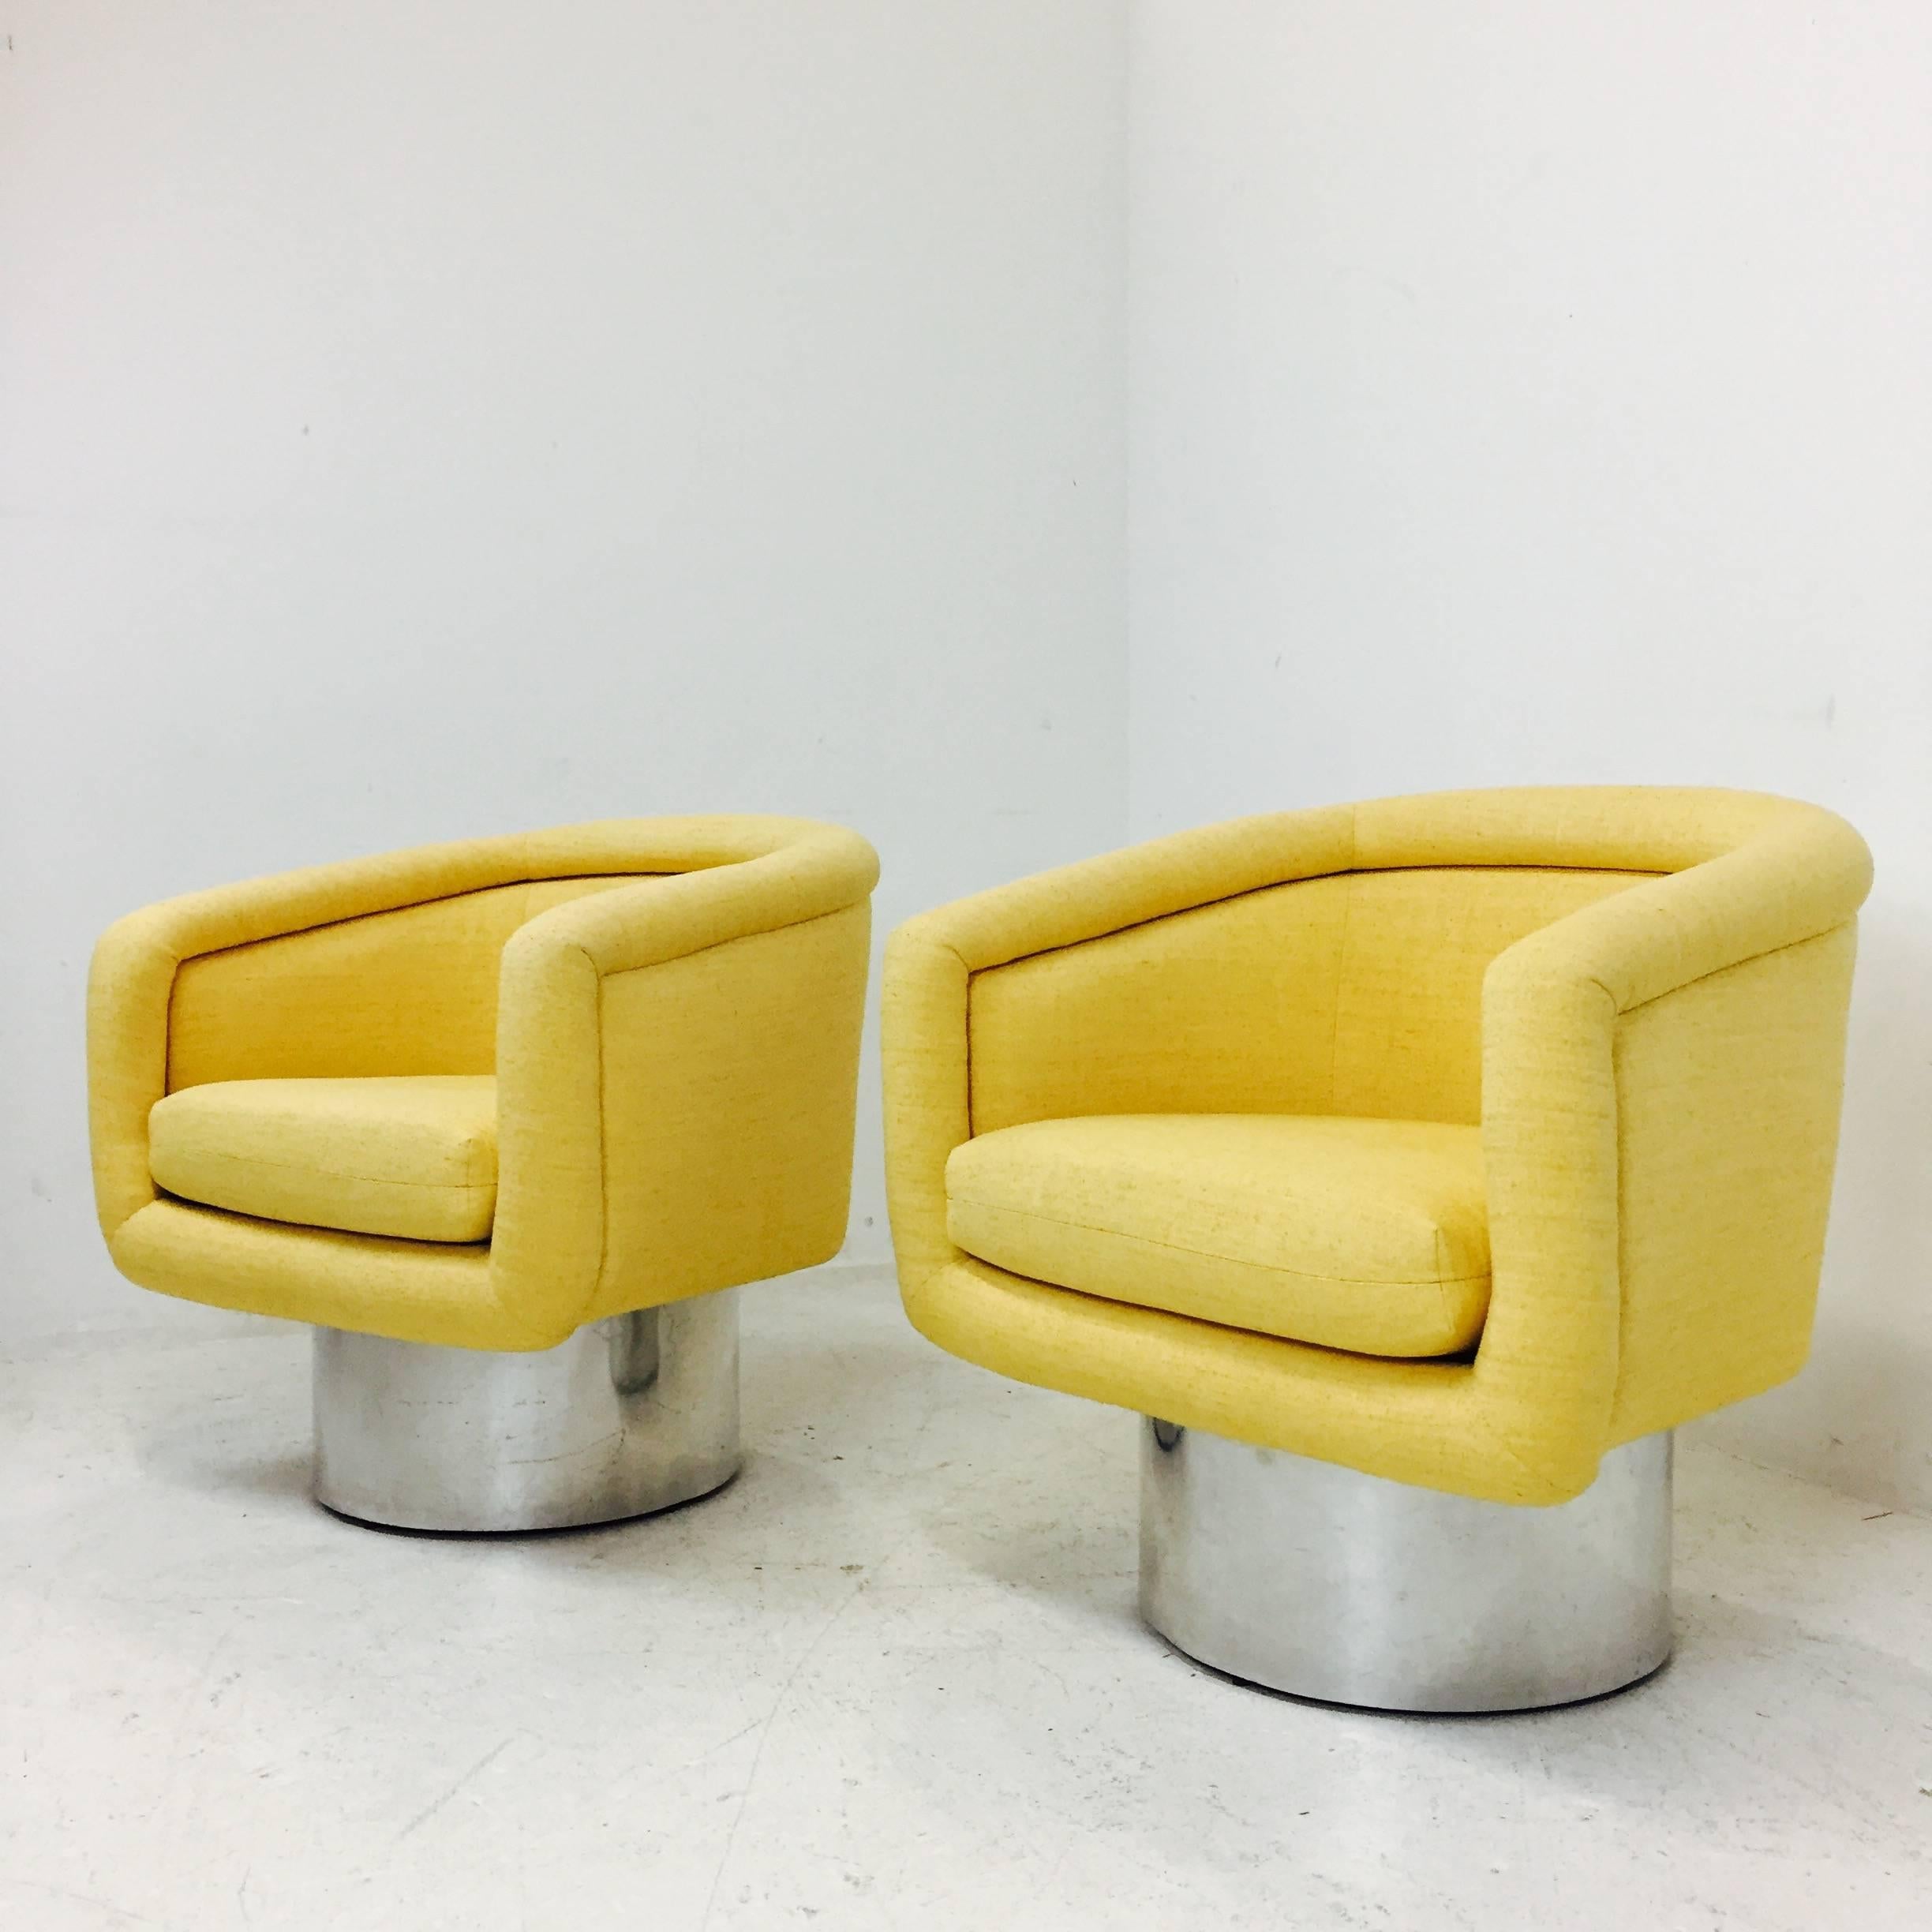 Mid-Century Modern Pair of Swivel Chairs with Polished Steel Plinth Base by Leon Rosen for Pace